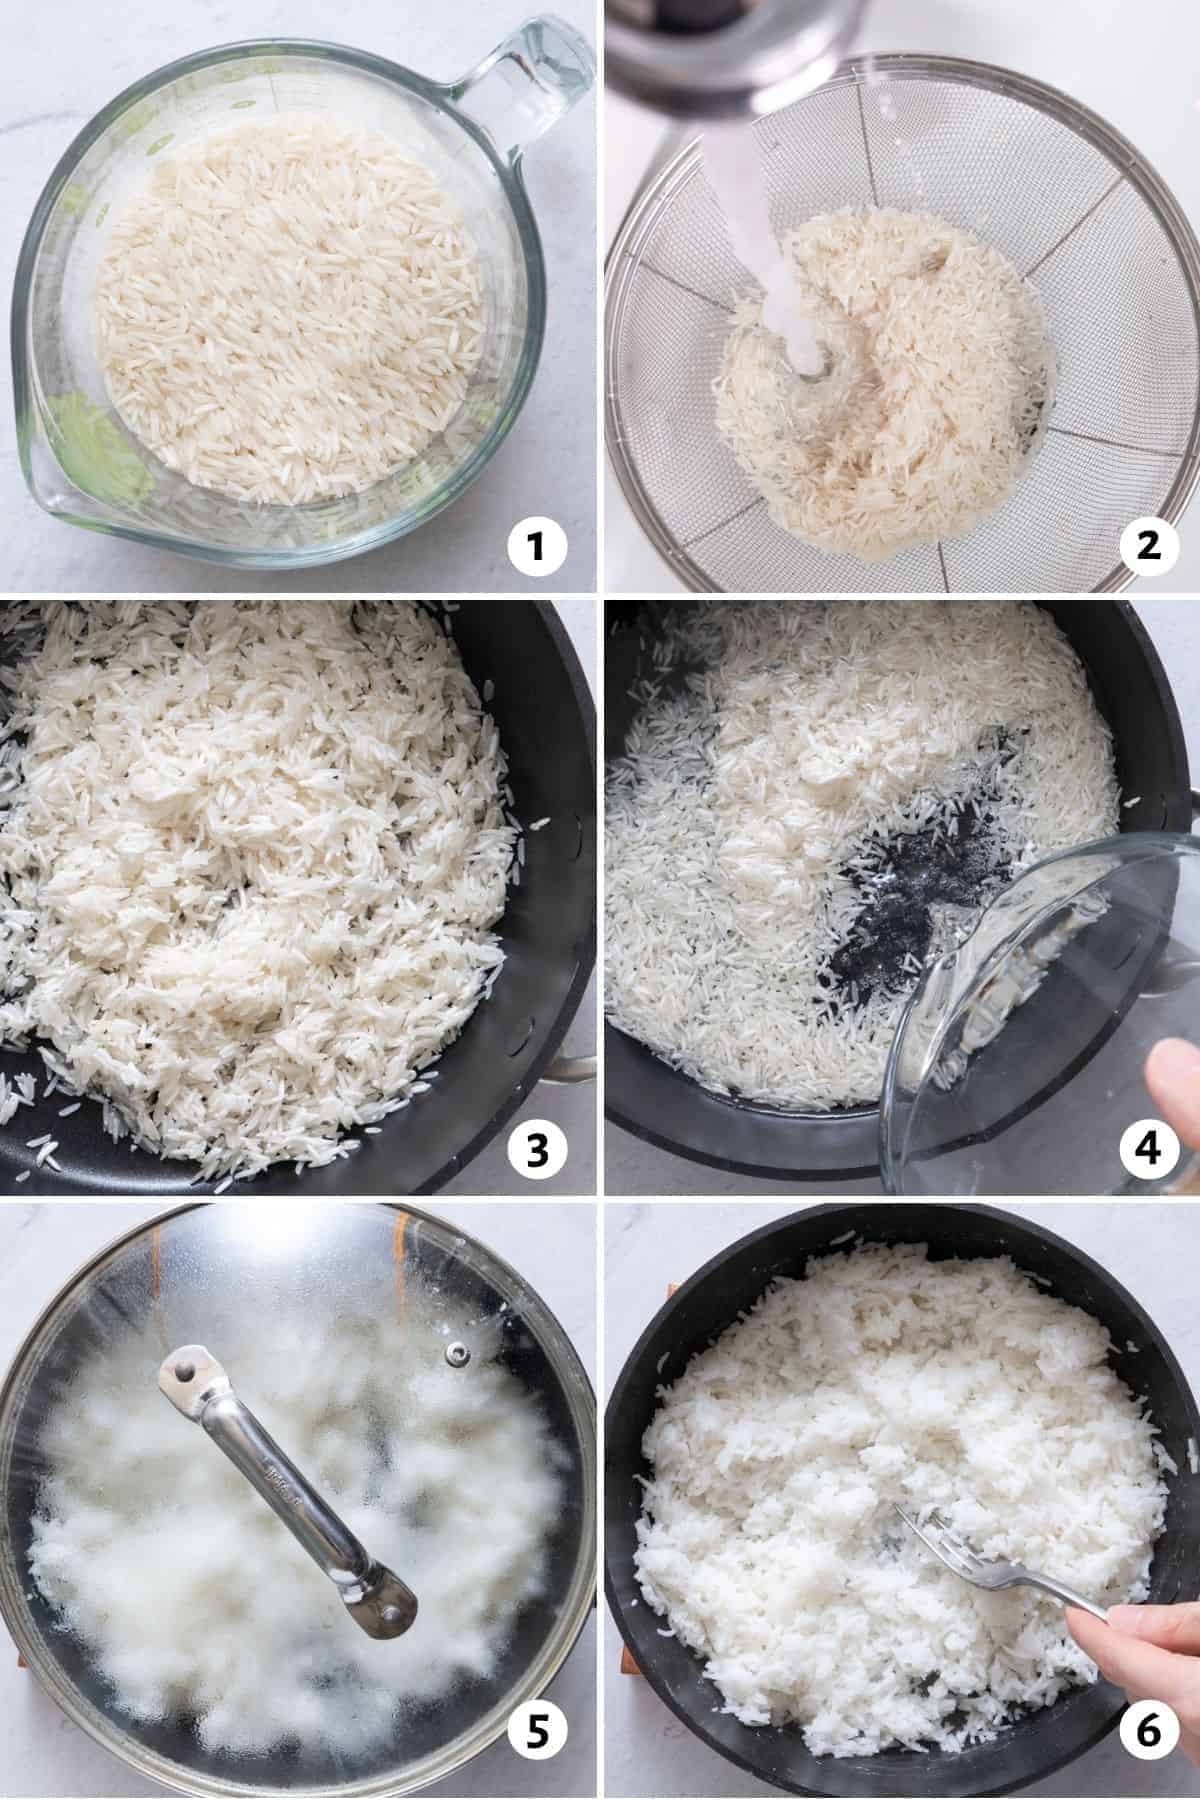 6 image collage on how to cook Basmati rice: 1. measure rice, 2. rinse, 3. add to sauce pan, 4. add water, 5. cover, and 6. fluff rice with fork.